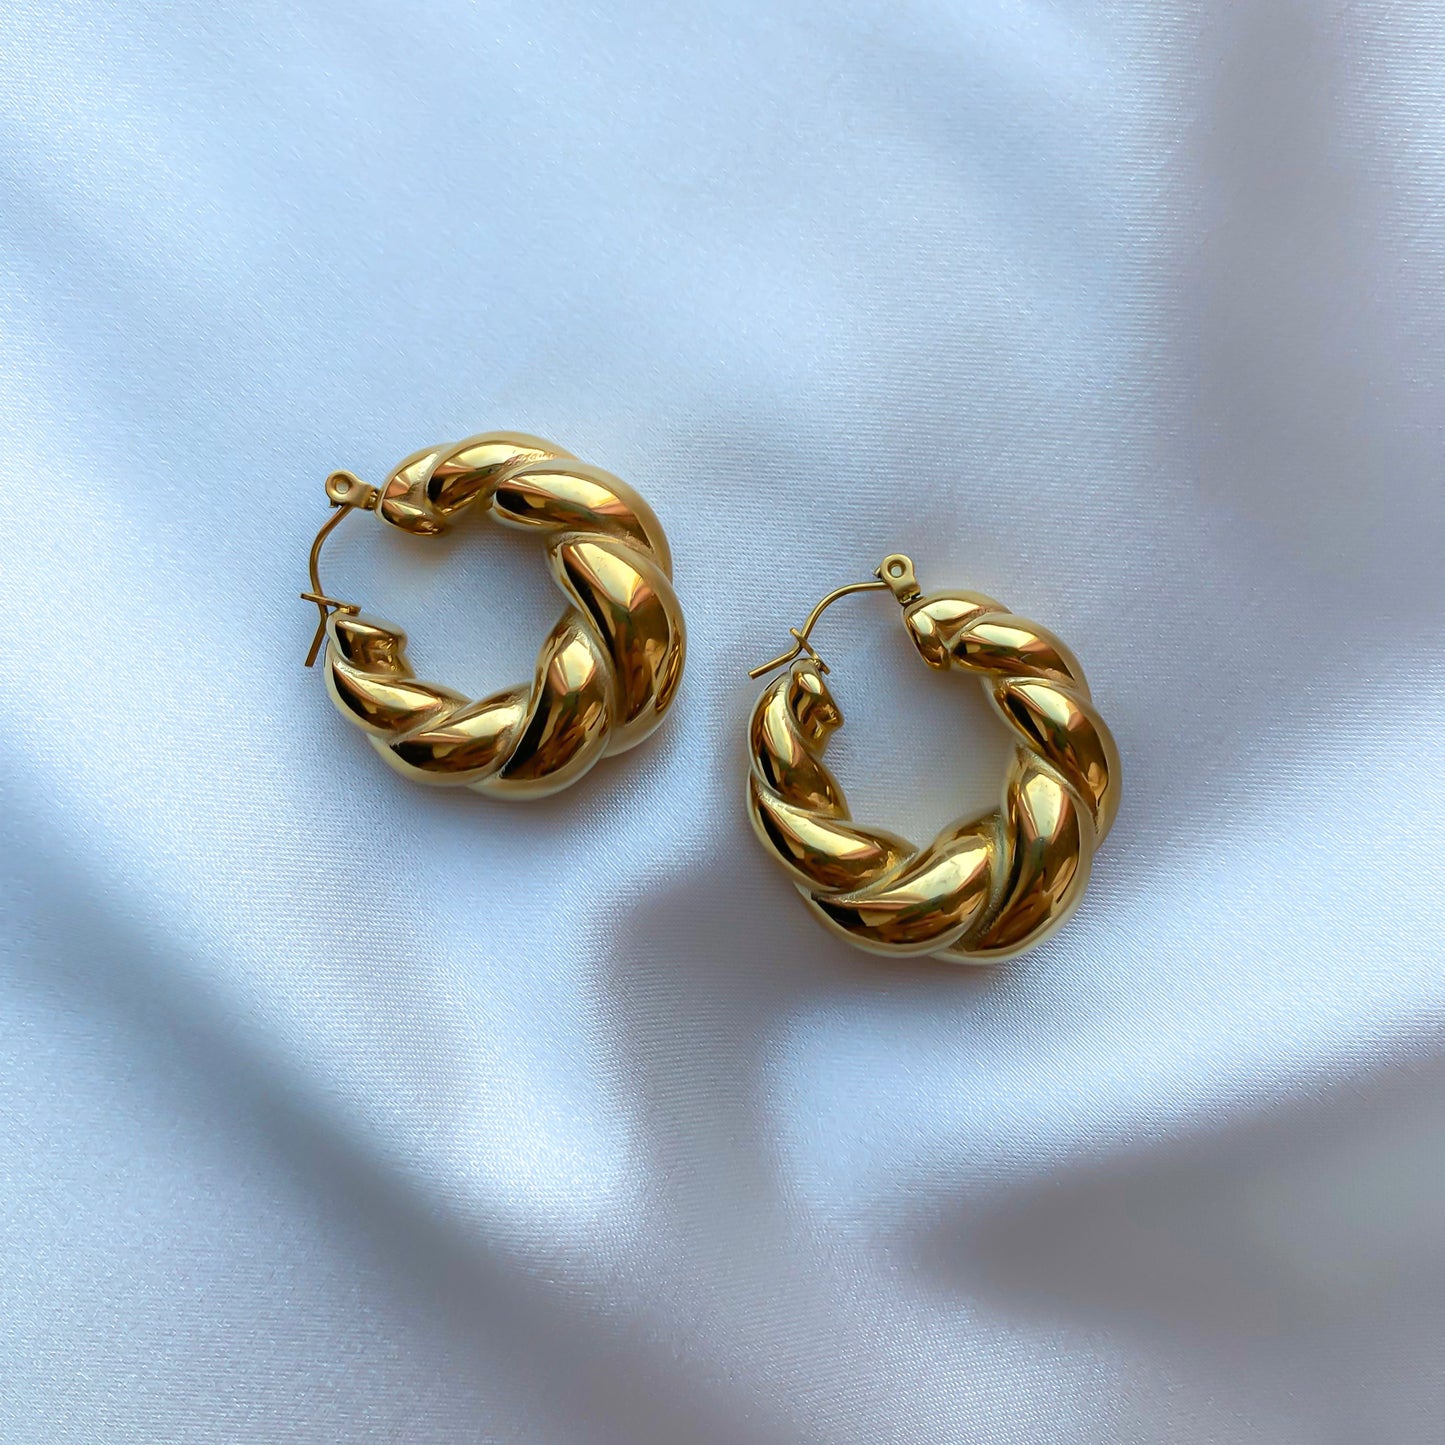 Maria Chubby Earrings│18k Gold Plated (Limited Edition)